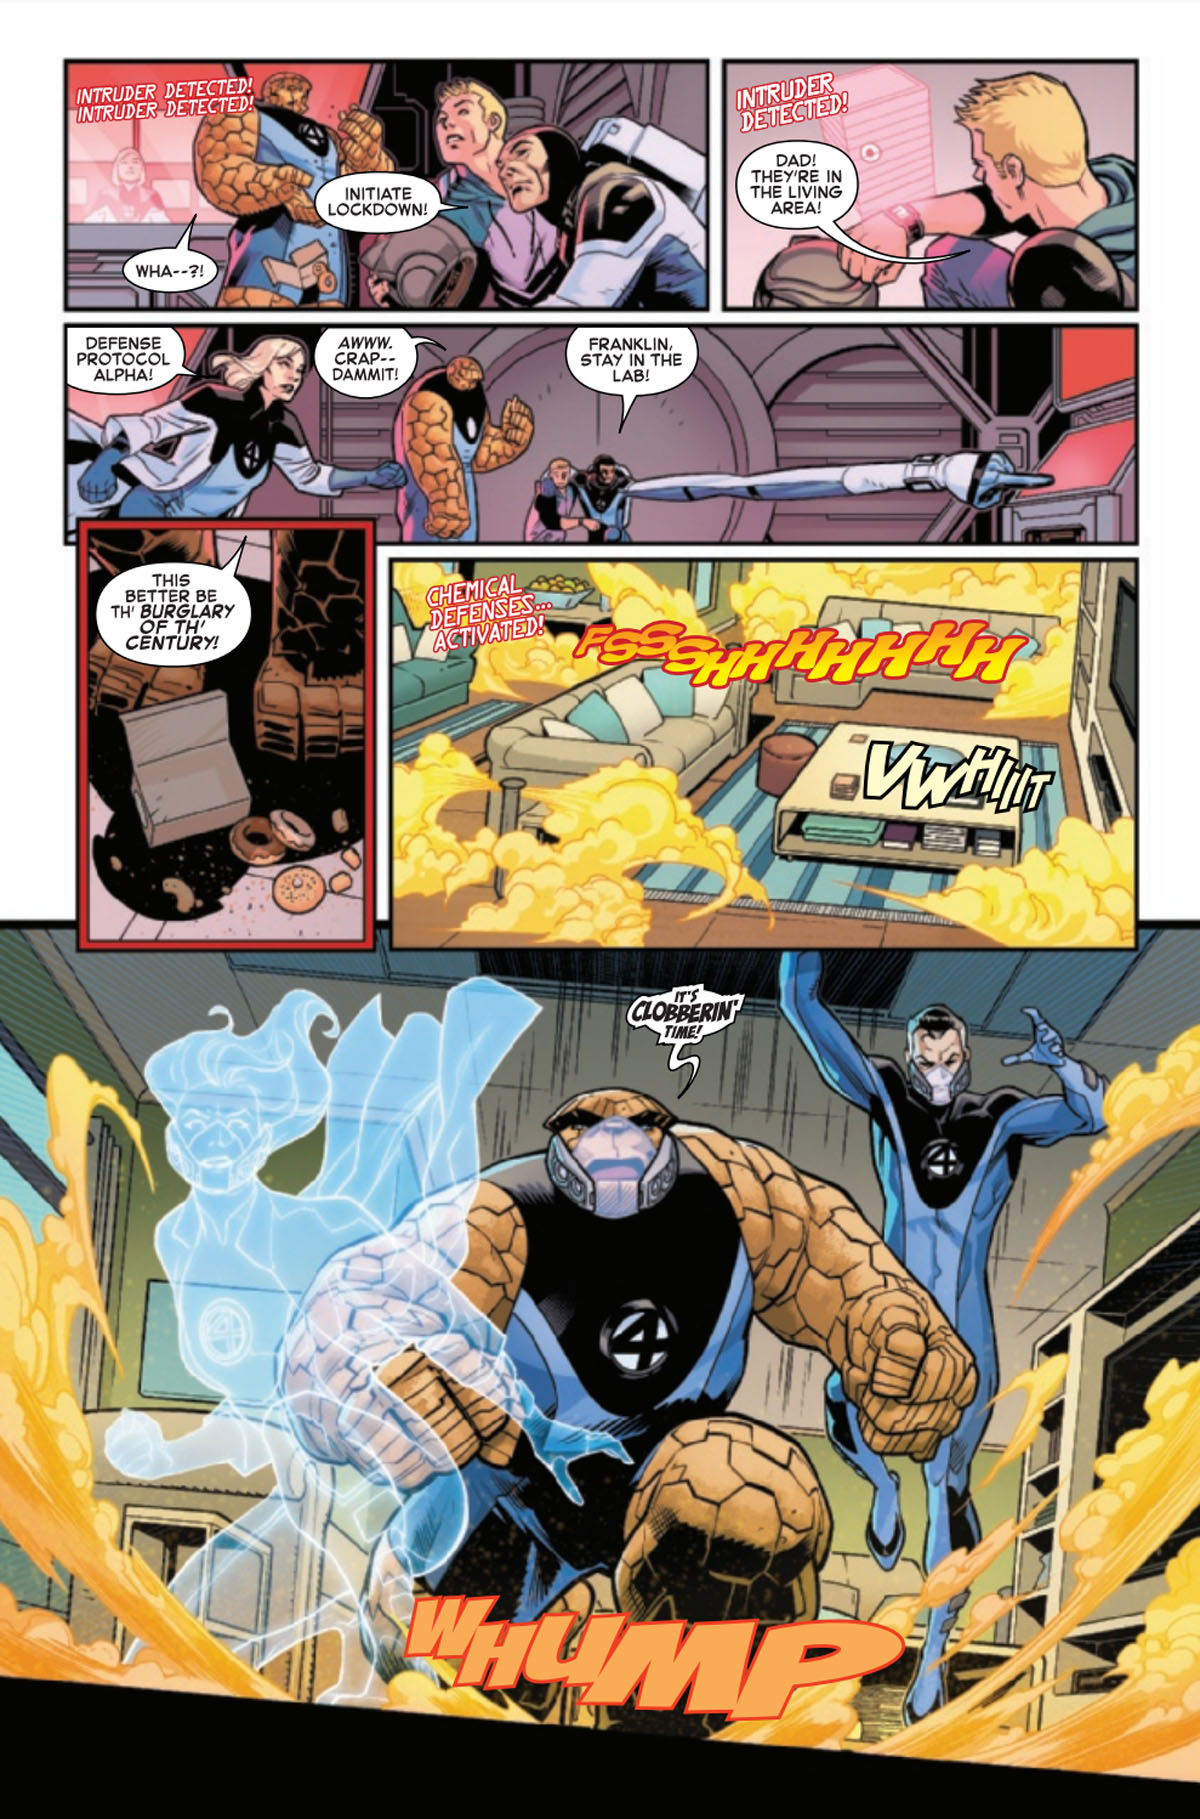 Fantastic Four: Life Story #5 page 4